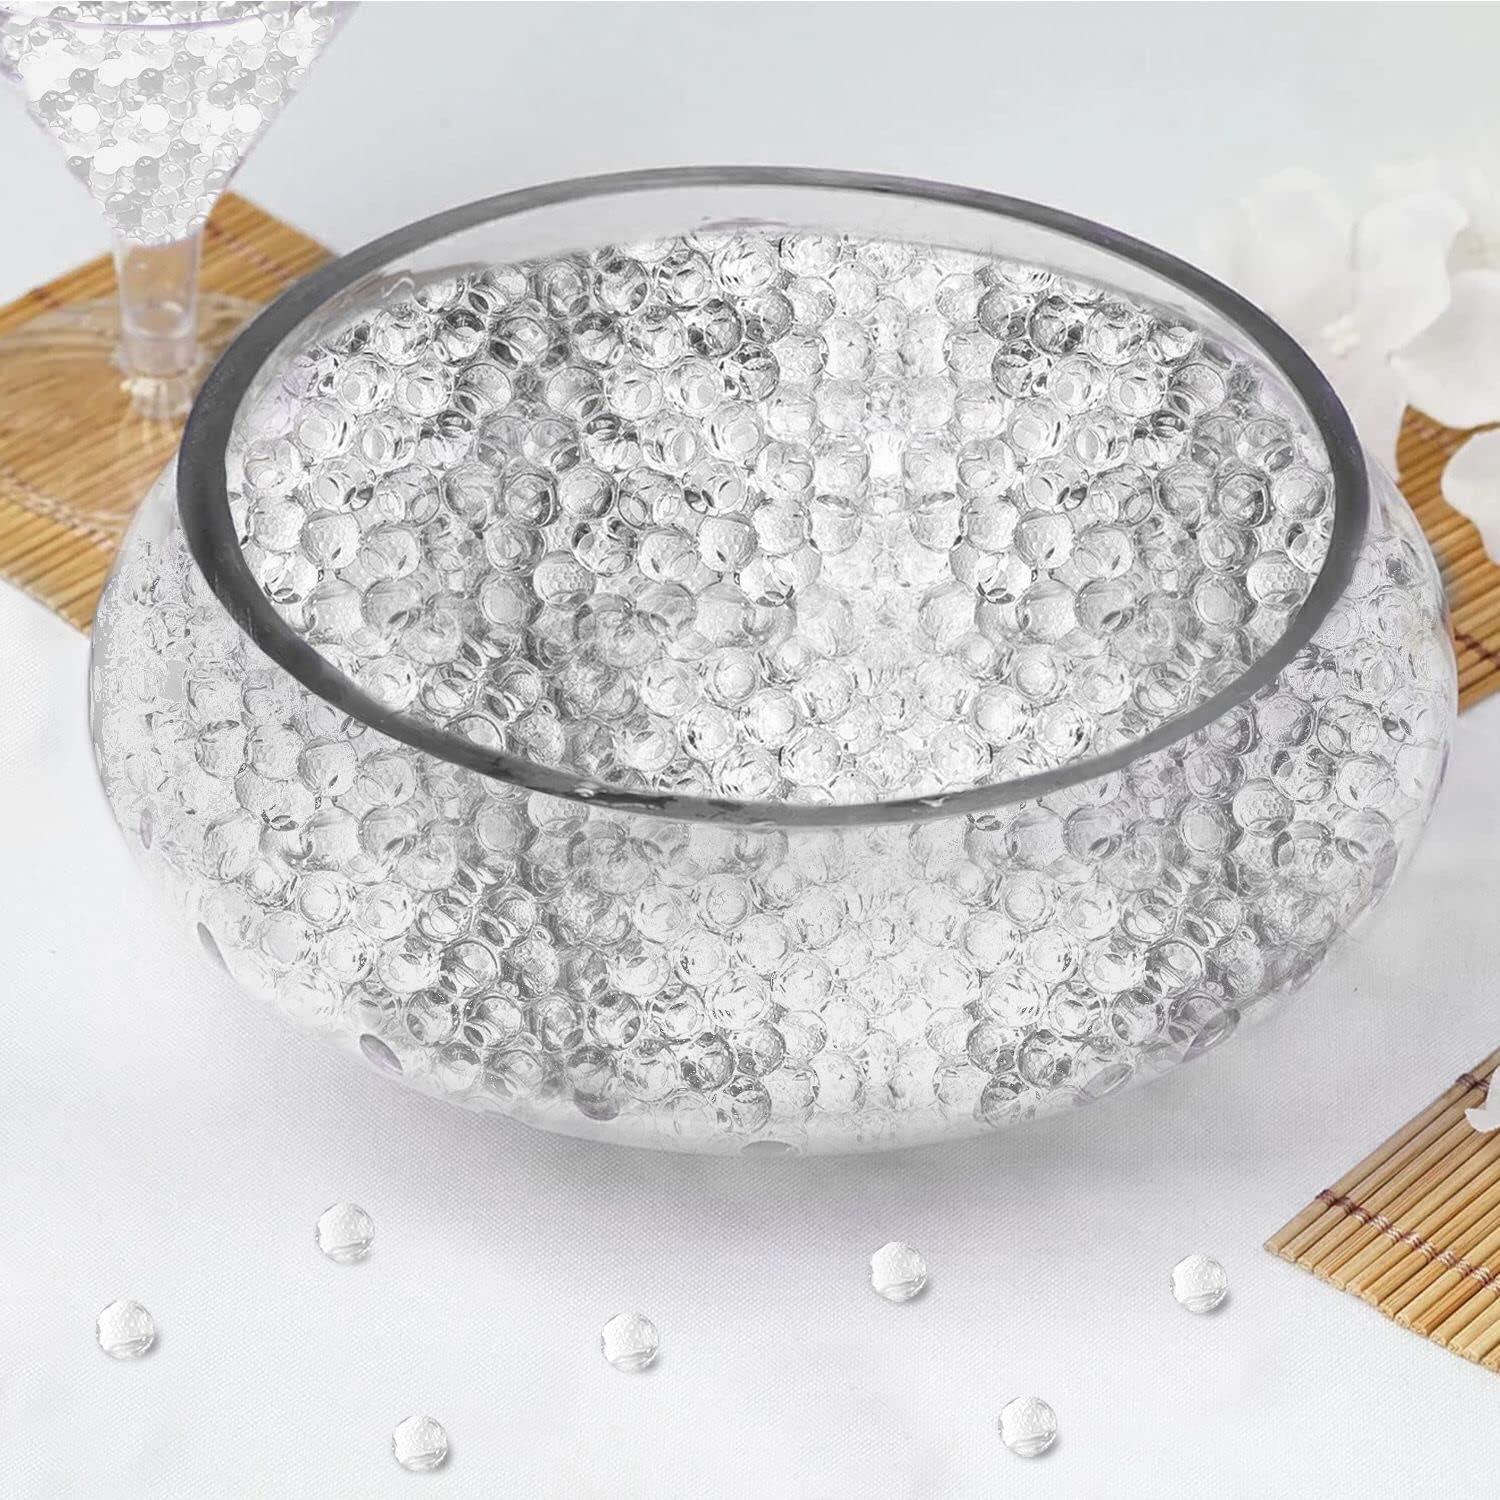 Clear Water Gel Beads, 50,000 Beads - Floating Pearls - Non-Toxic